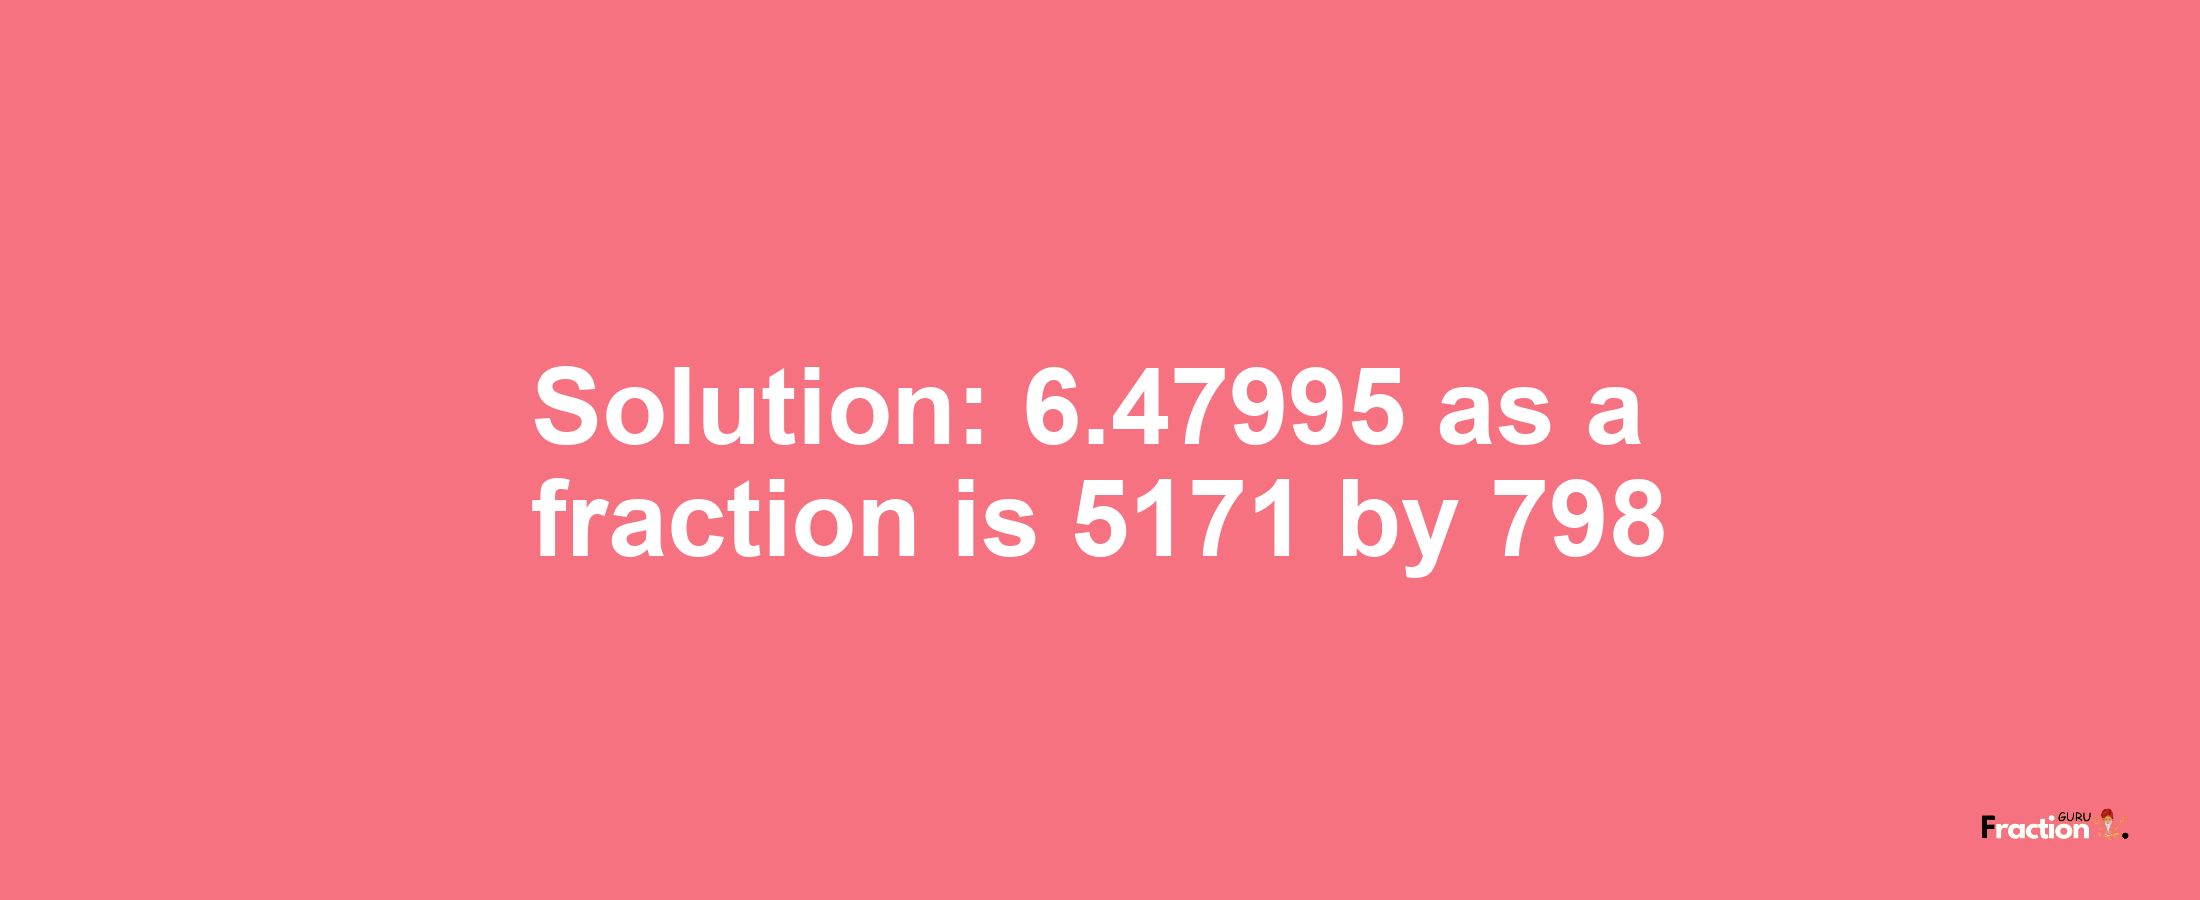 Solution:6.47995 as a fraction is 5171/798